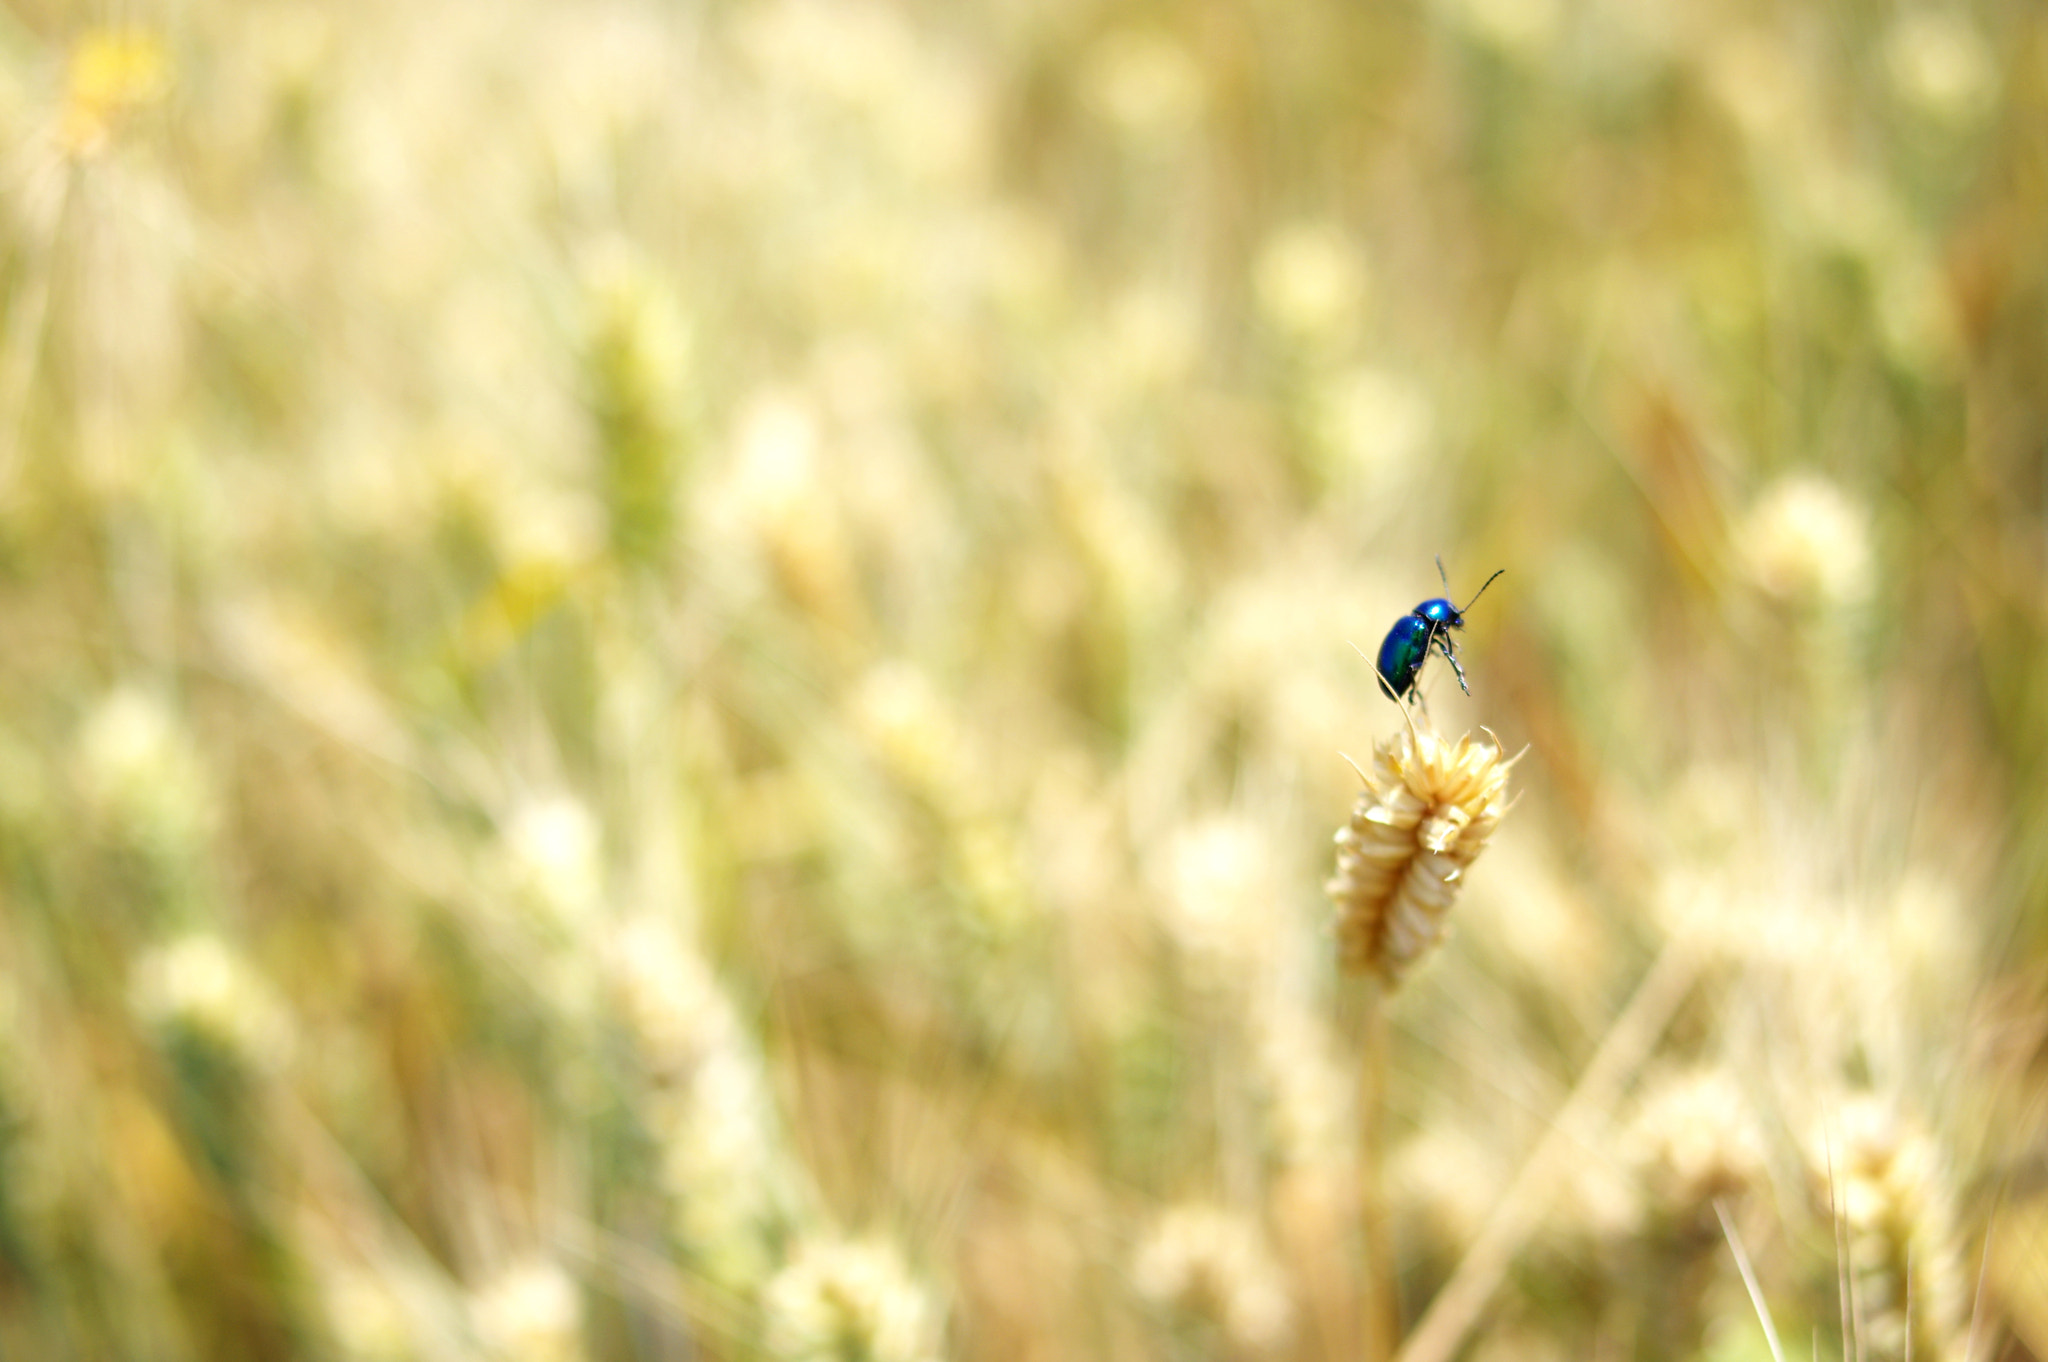 Pentax K-3 sample photo. 麦田里的一只昆虫（an insect in the field） photography